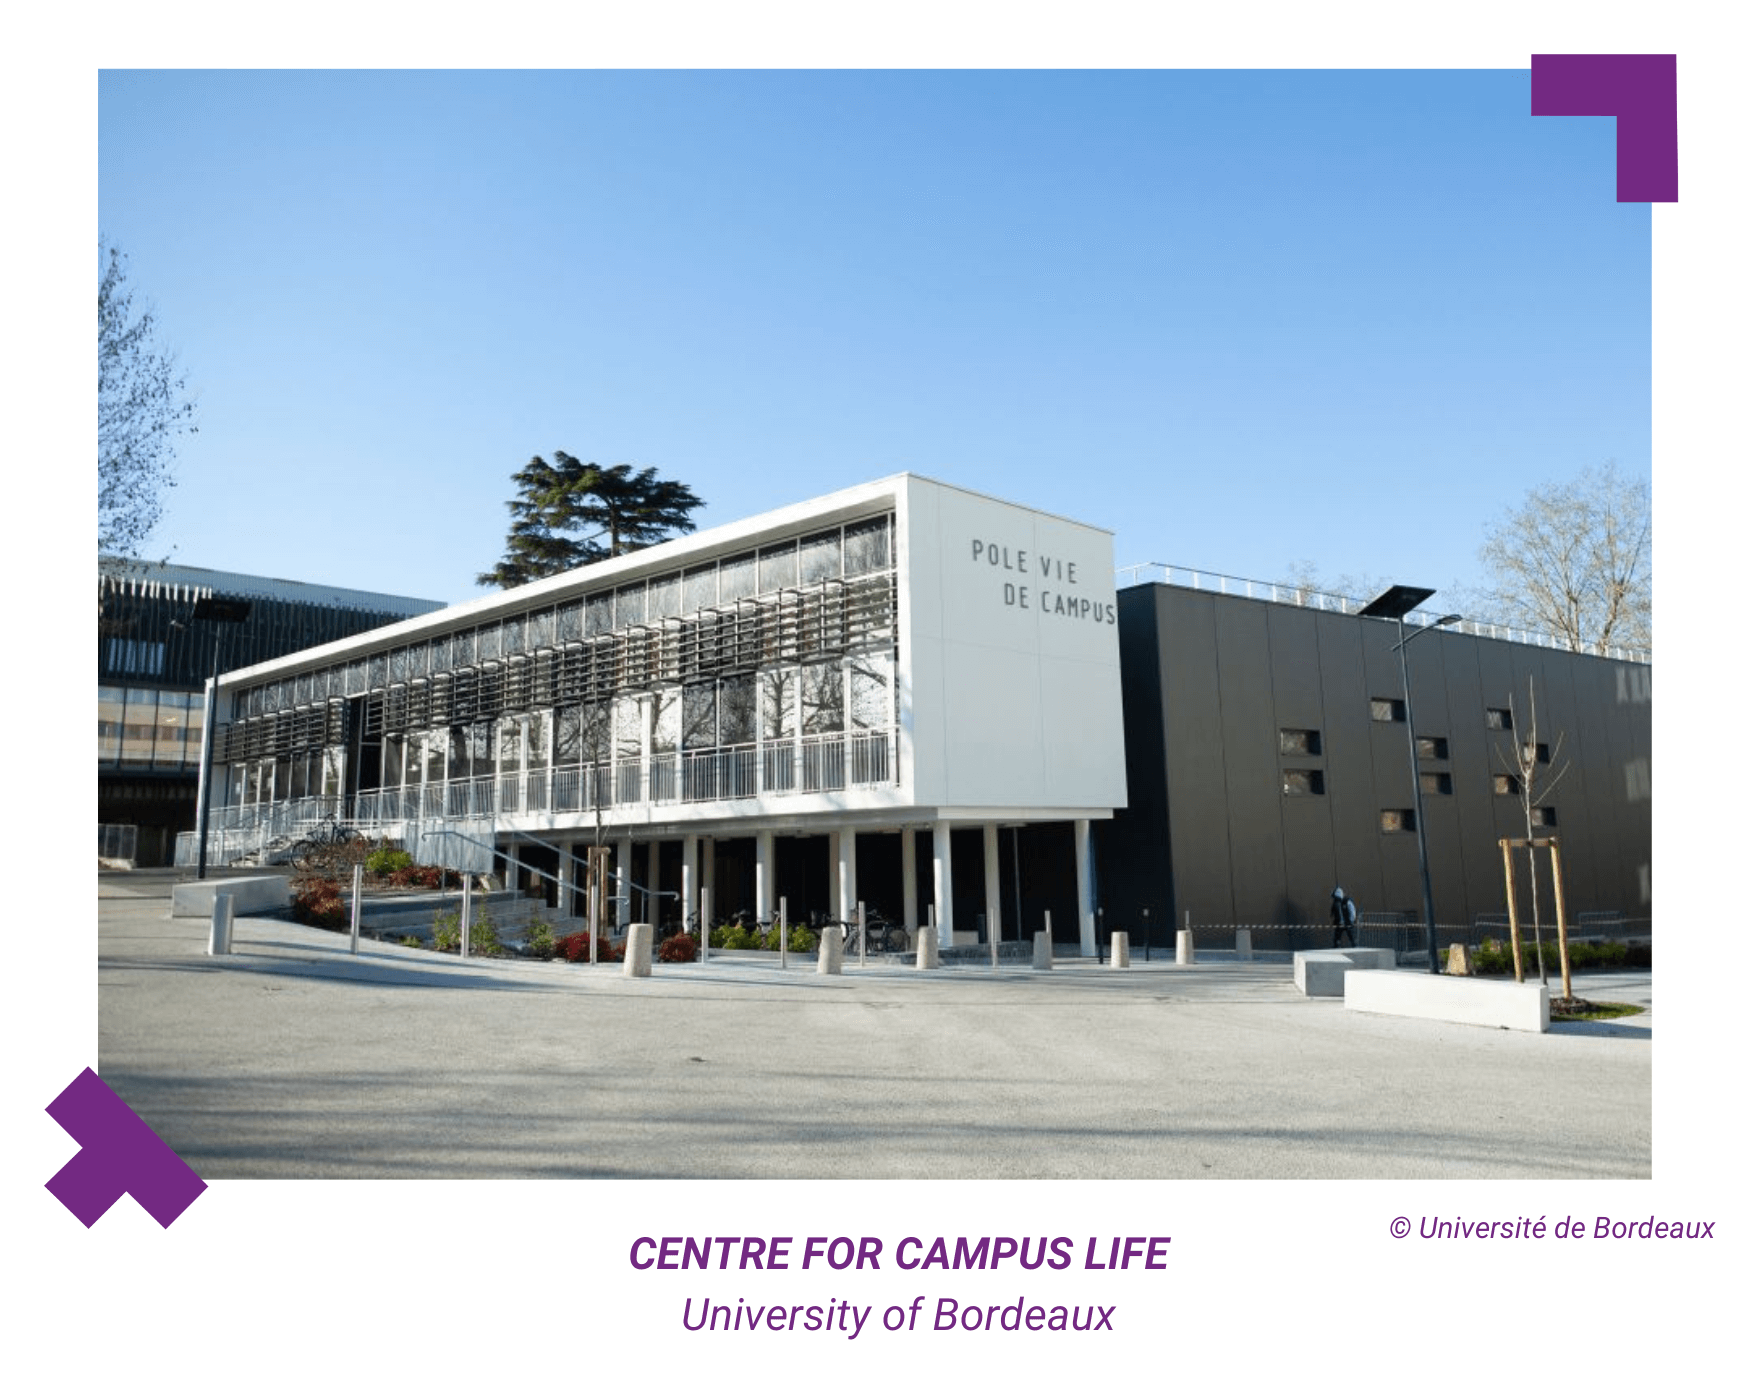 Feature of the Centre for Campus Life, University of Bordeaux